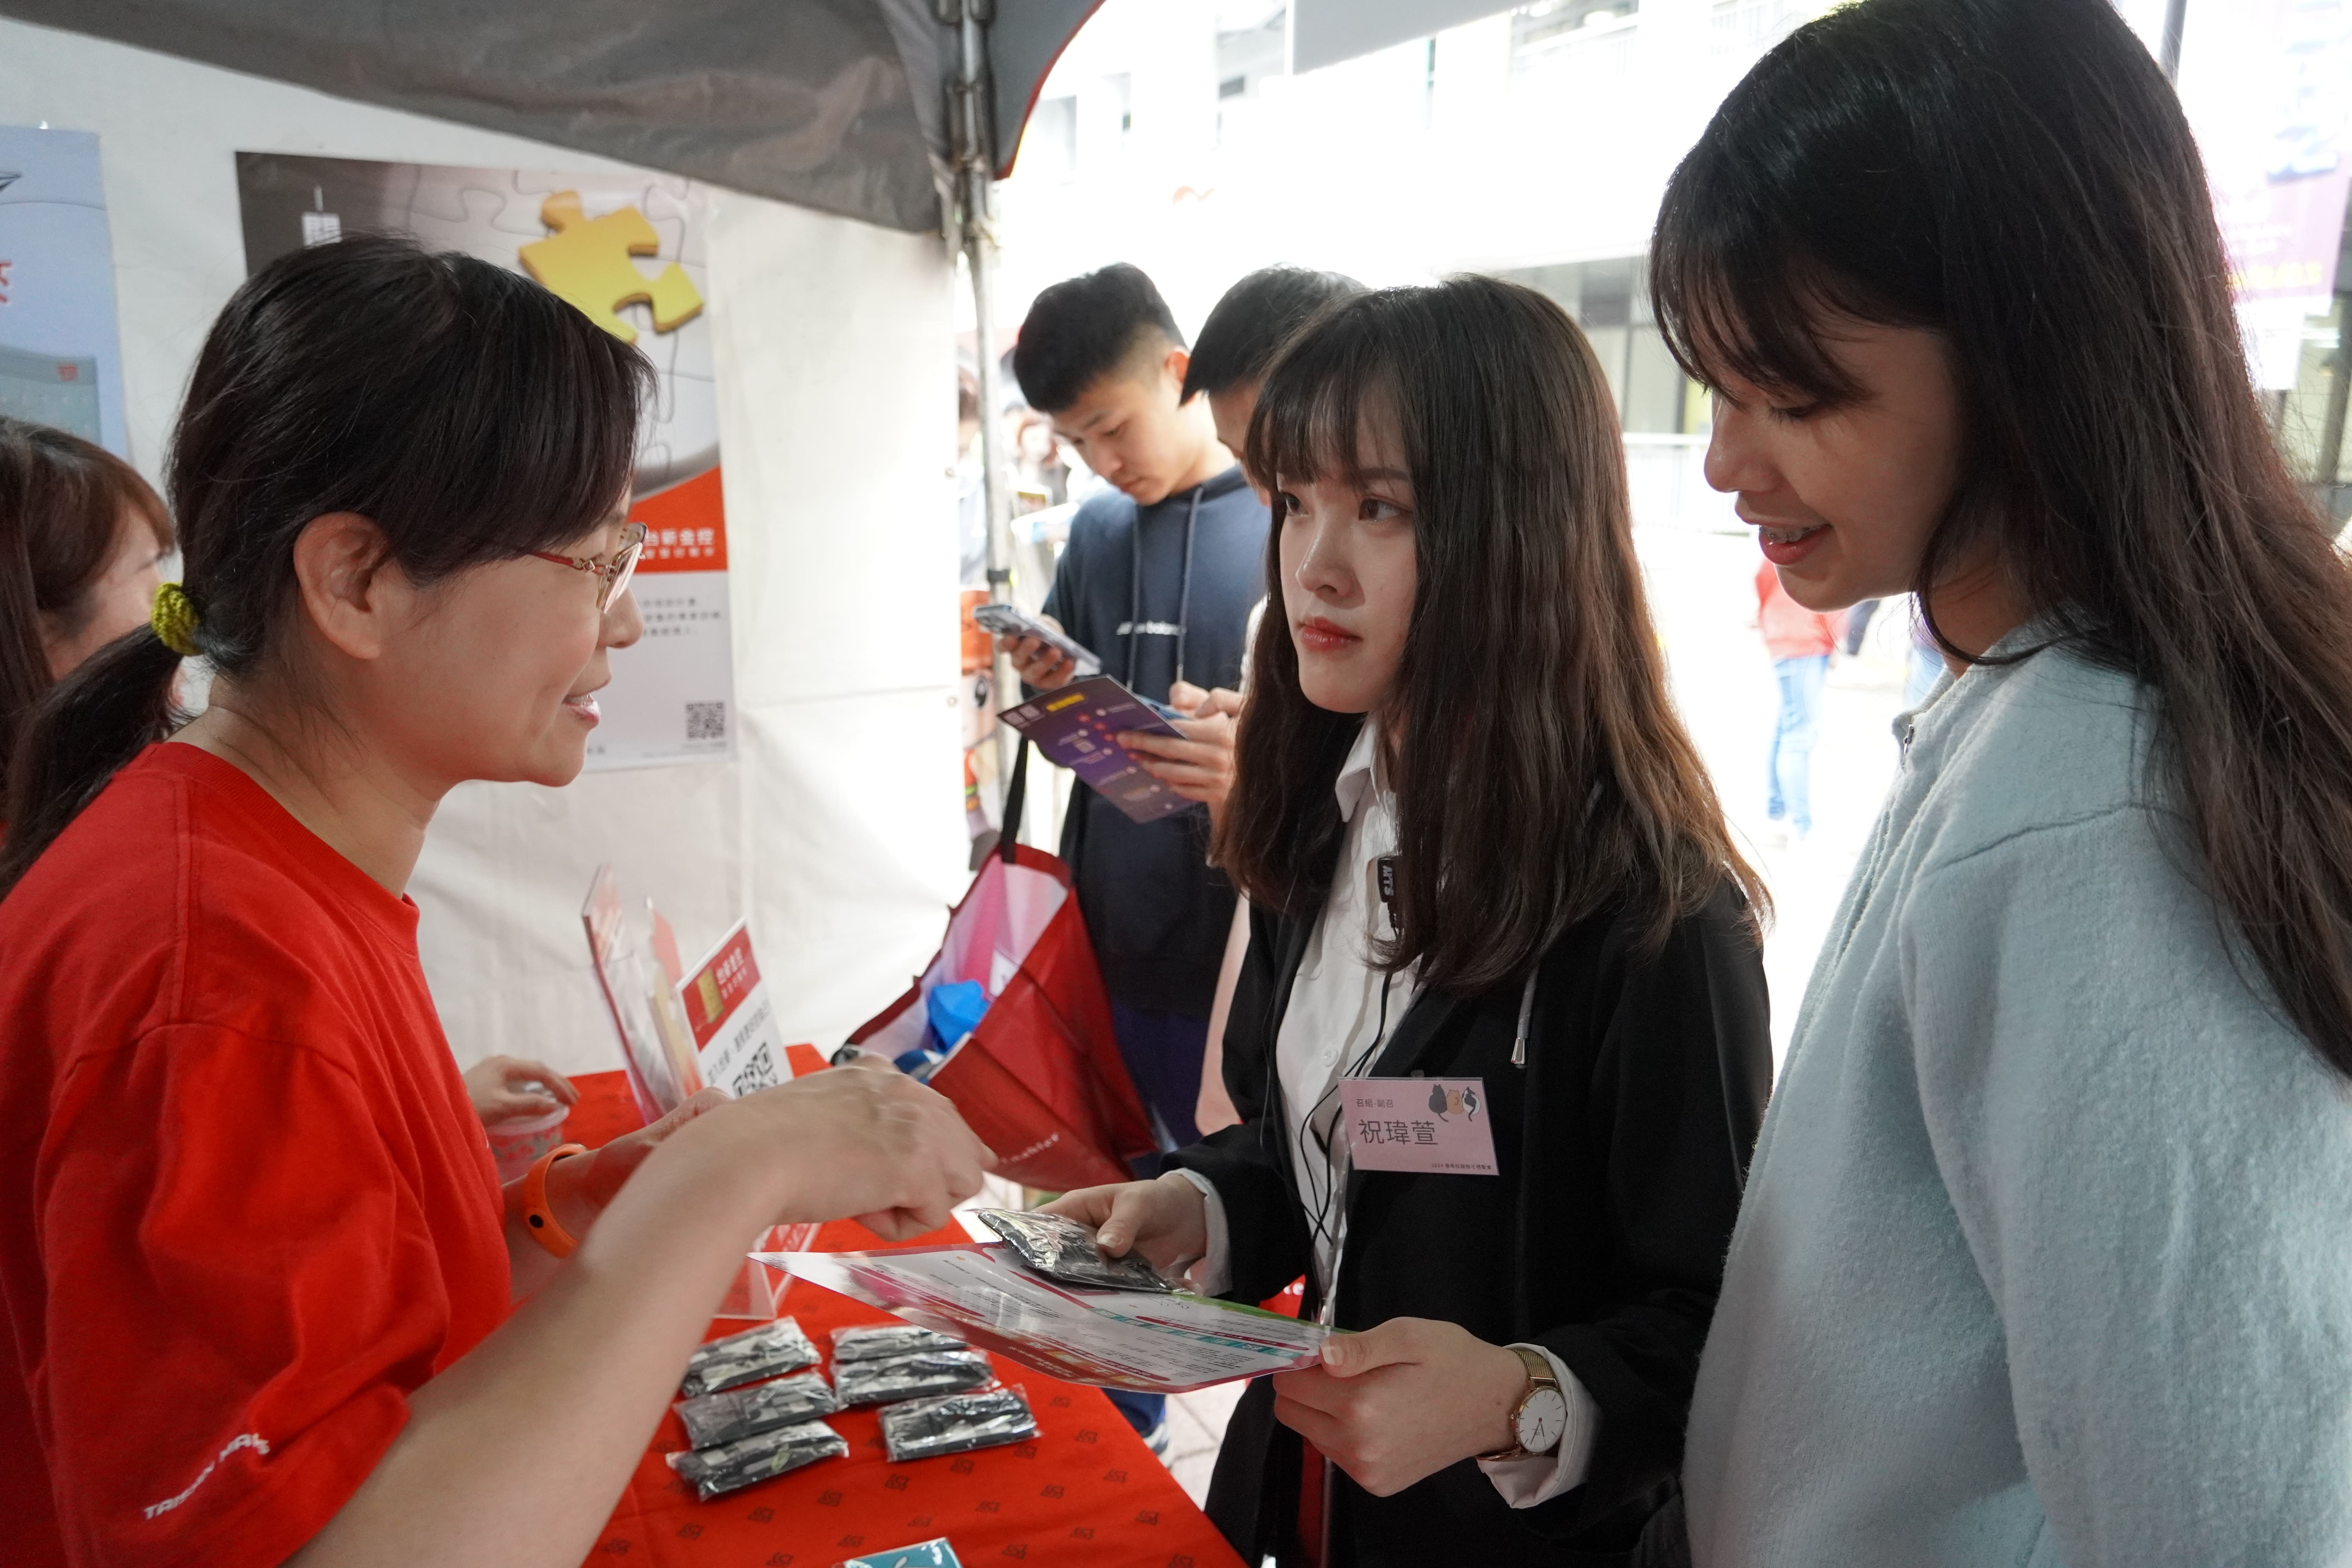 Wei-Xuan Zhu (second from right), a junior in the Department of Business Administration at Taiwan Tech, is double majoring in finance and plans to intern in a bank.